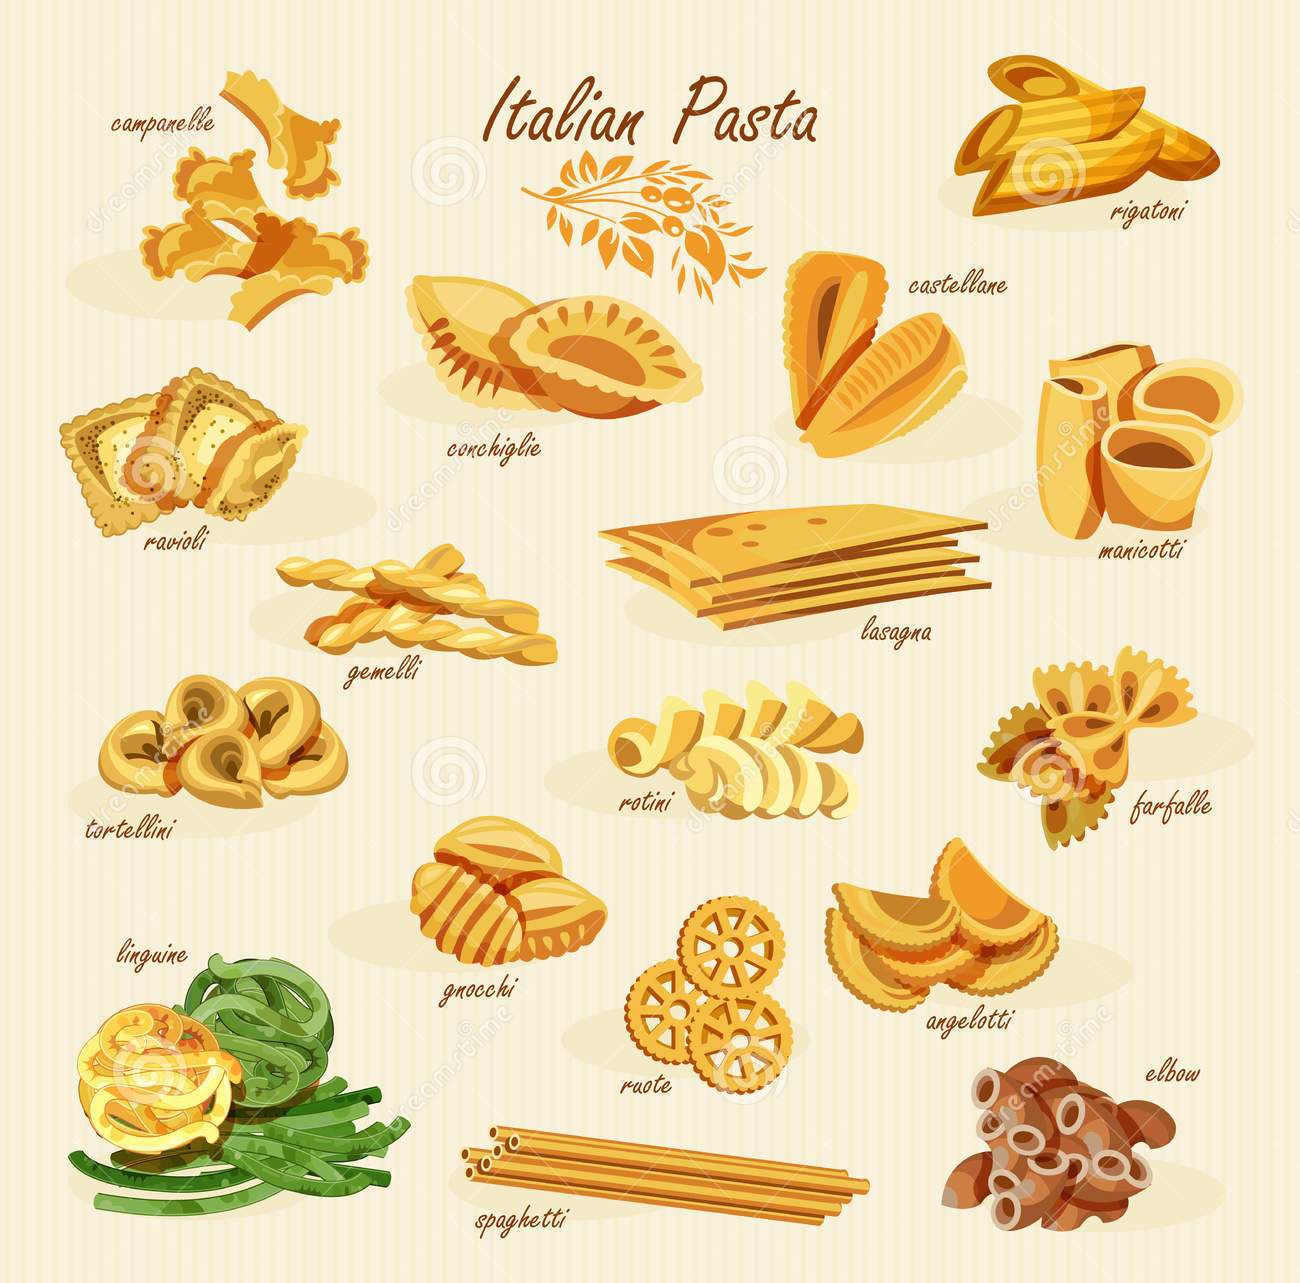 25th October is World Pasta day - Private Italian Lessons in Limassol